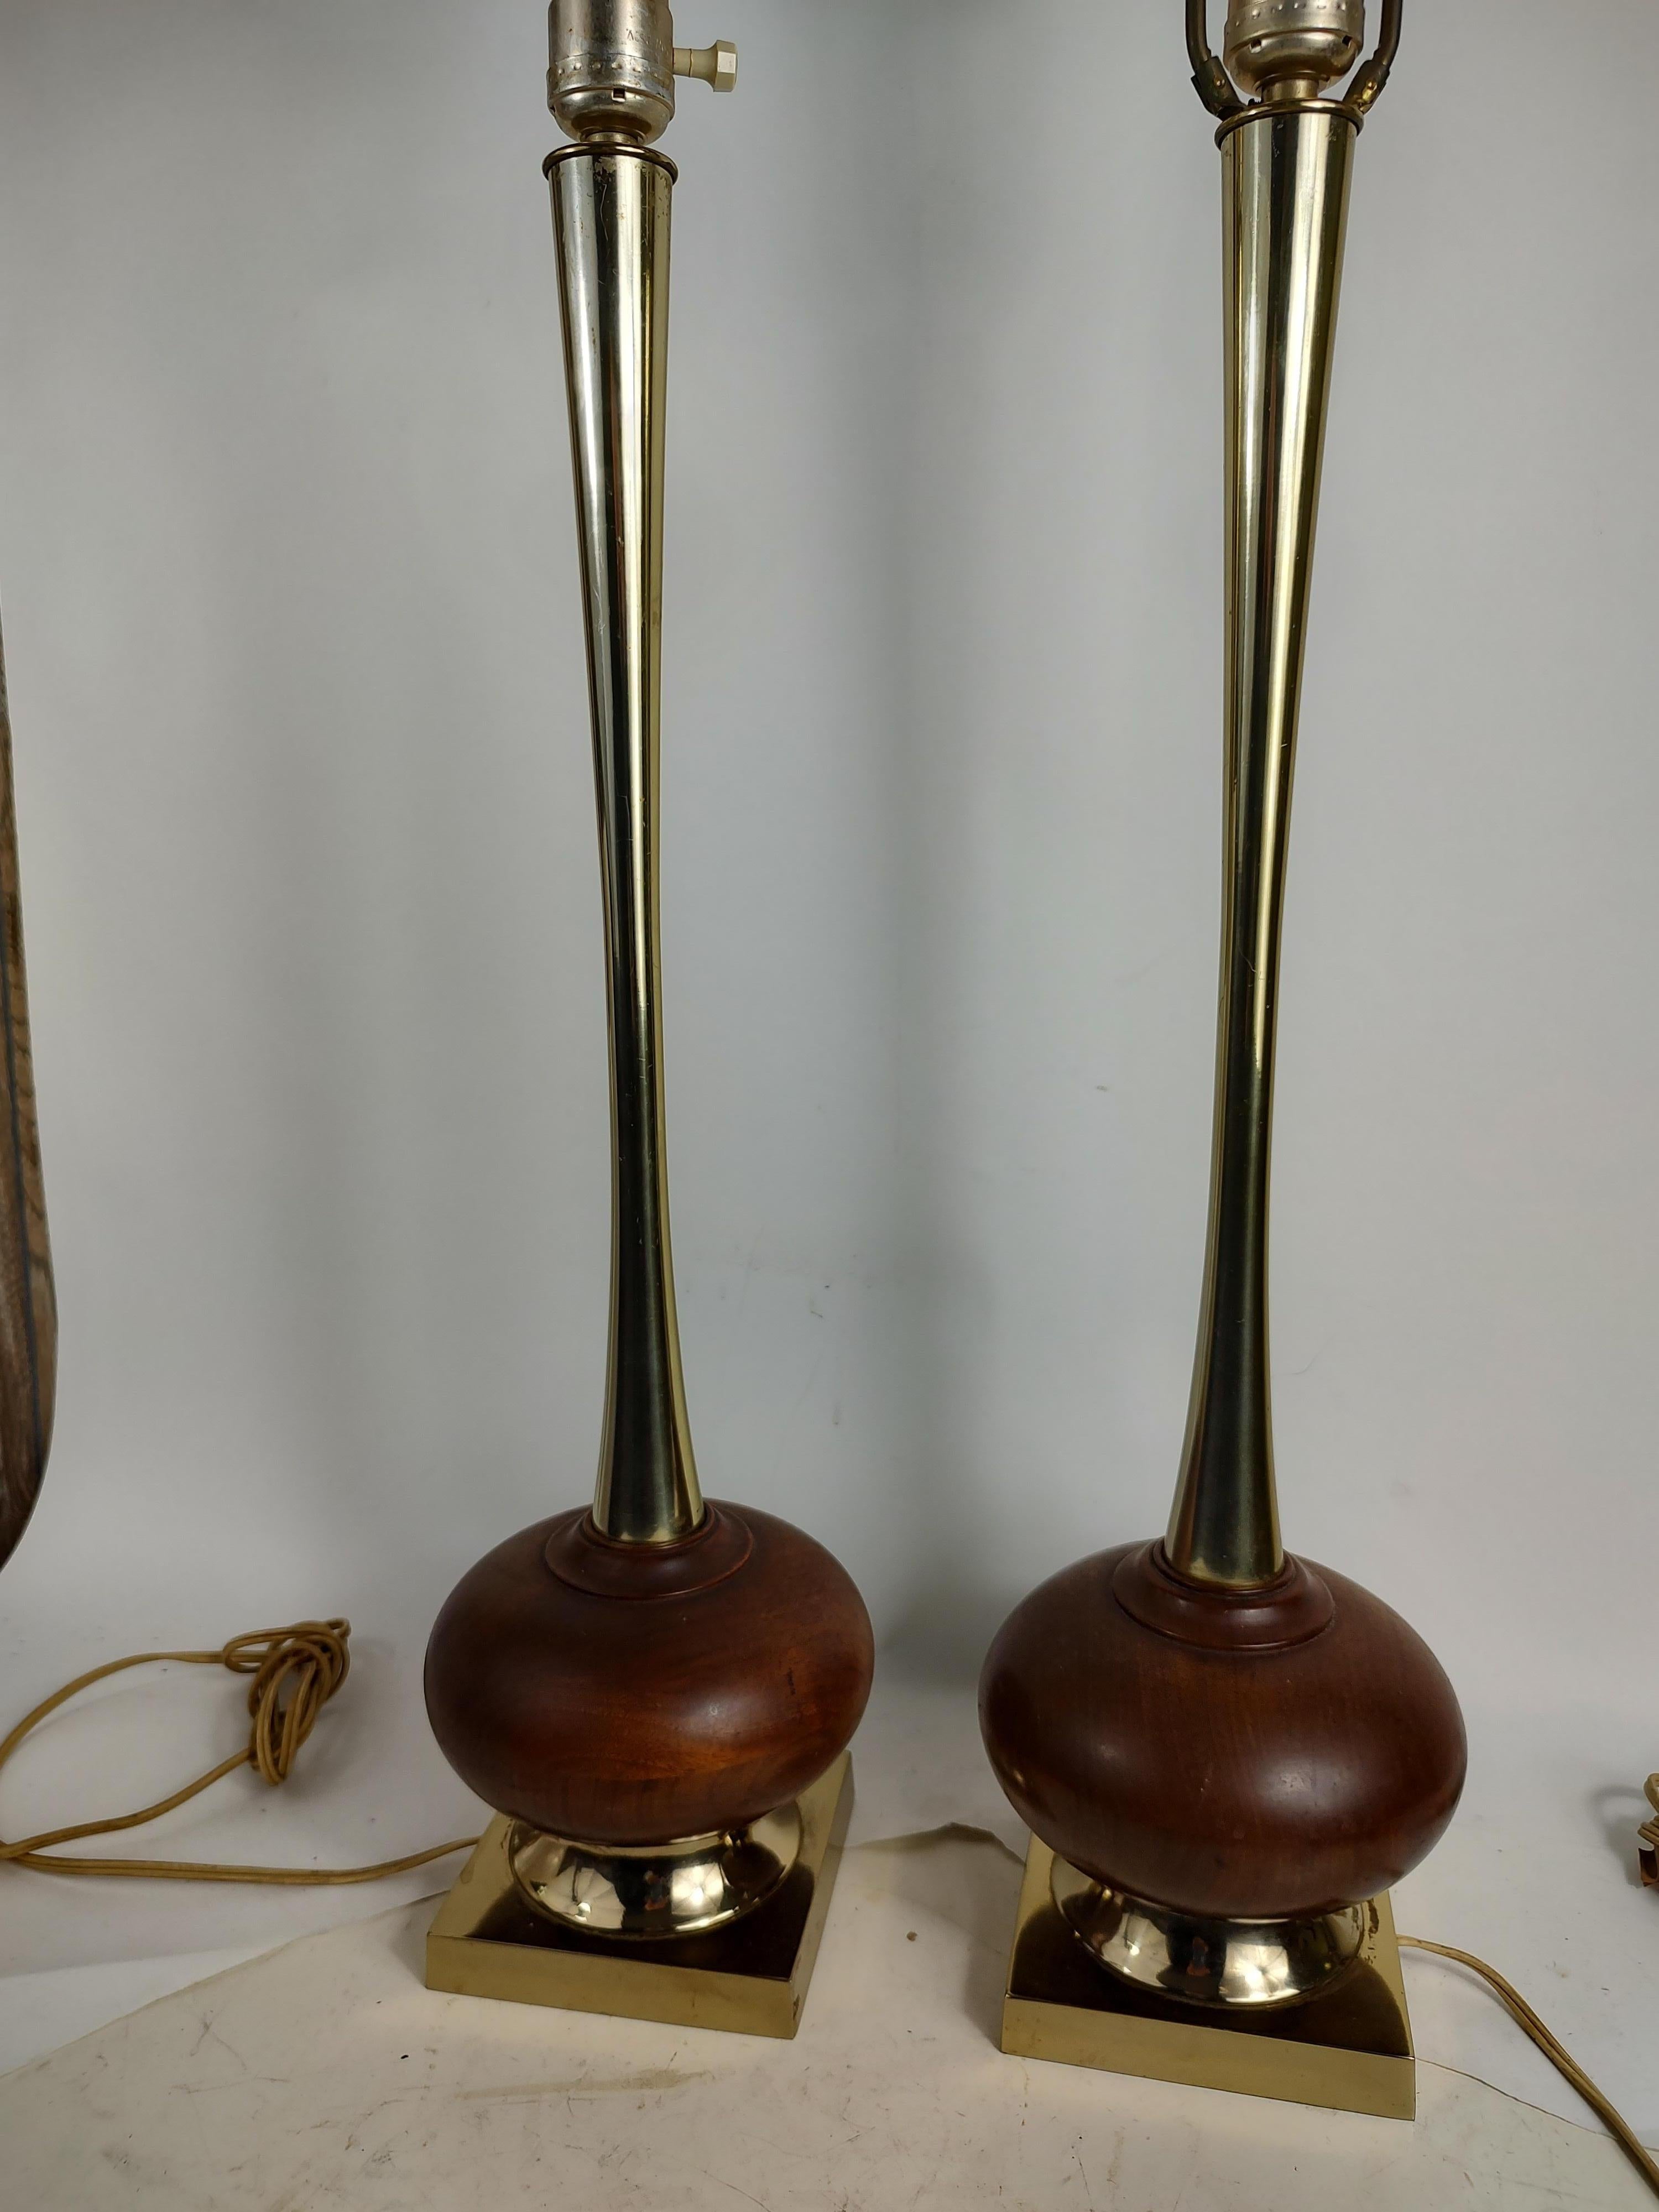 Pair of Tall Walnut & Brass Mid-Century Modern Table Lamps attrib Laurel Lamp co In Good Condition For Sale In Port Jervis, NY